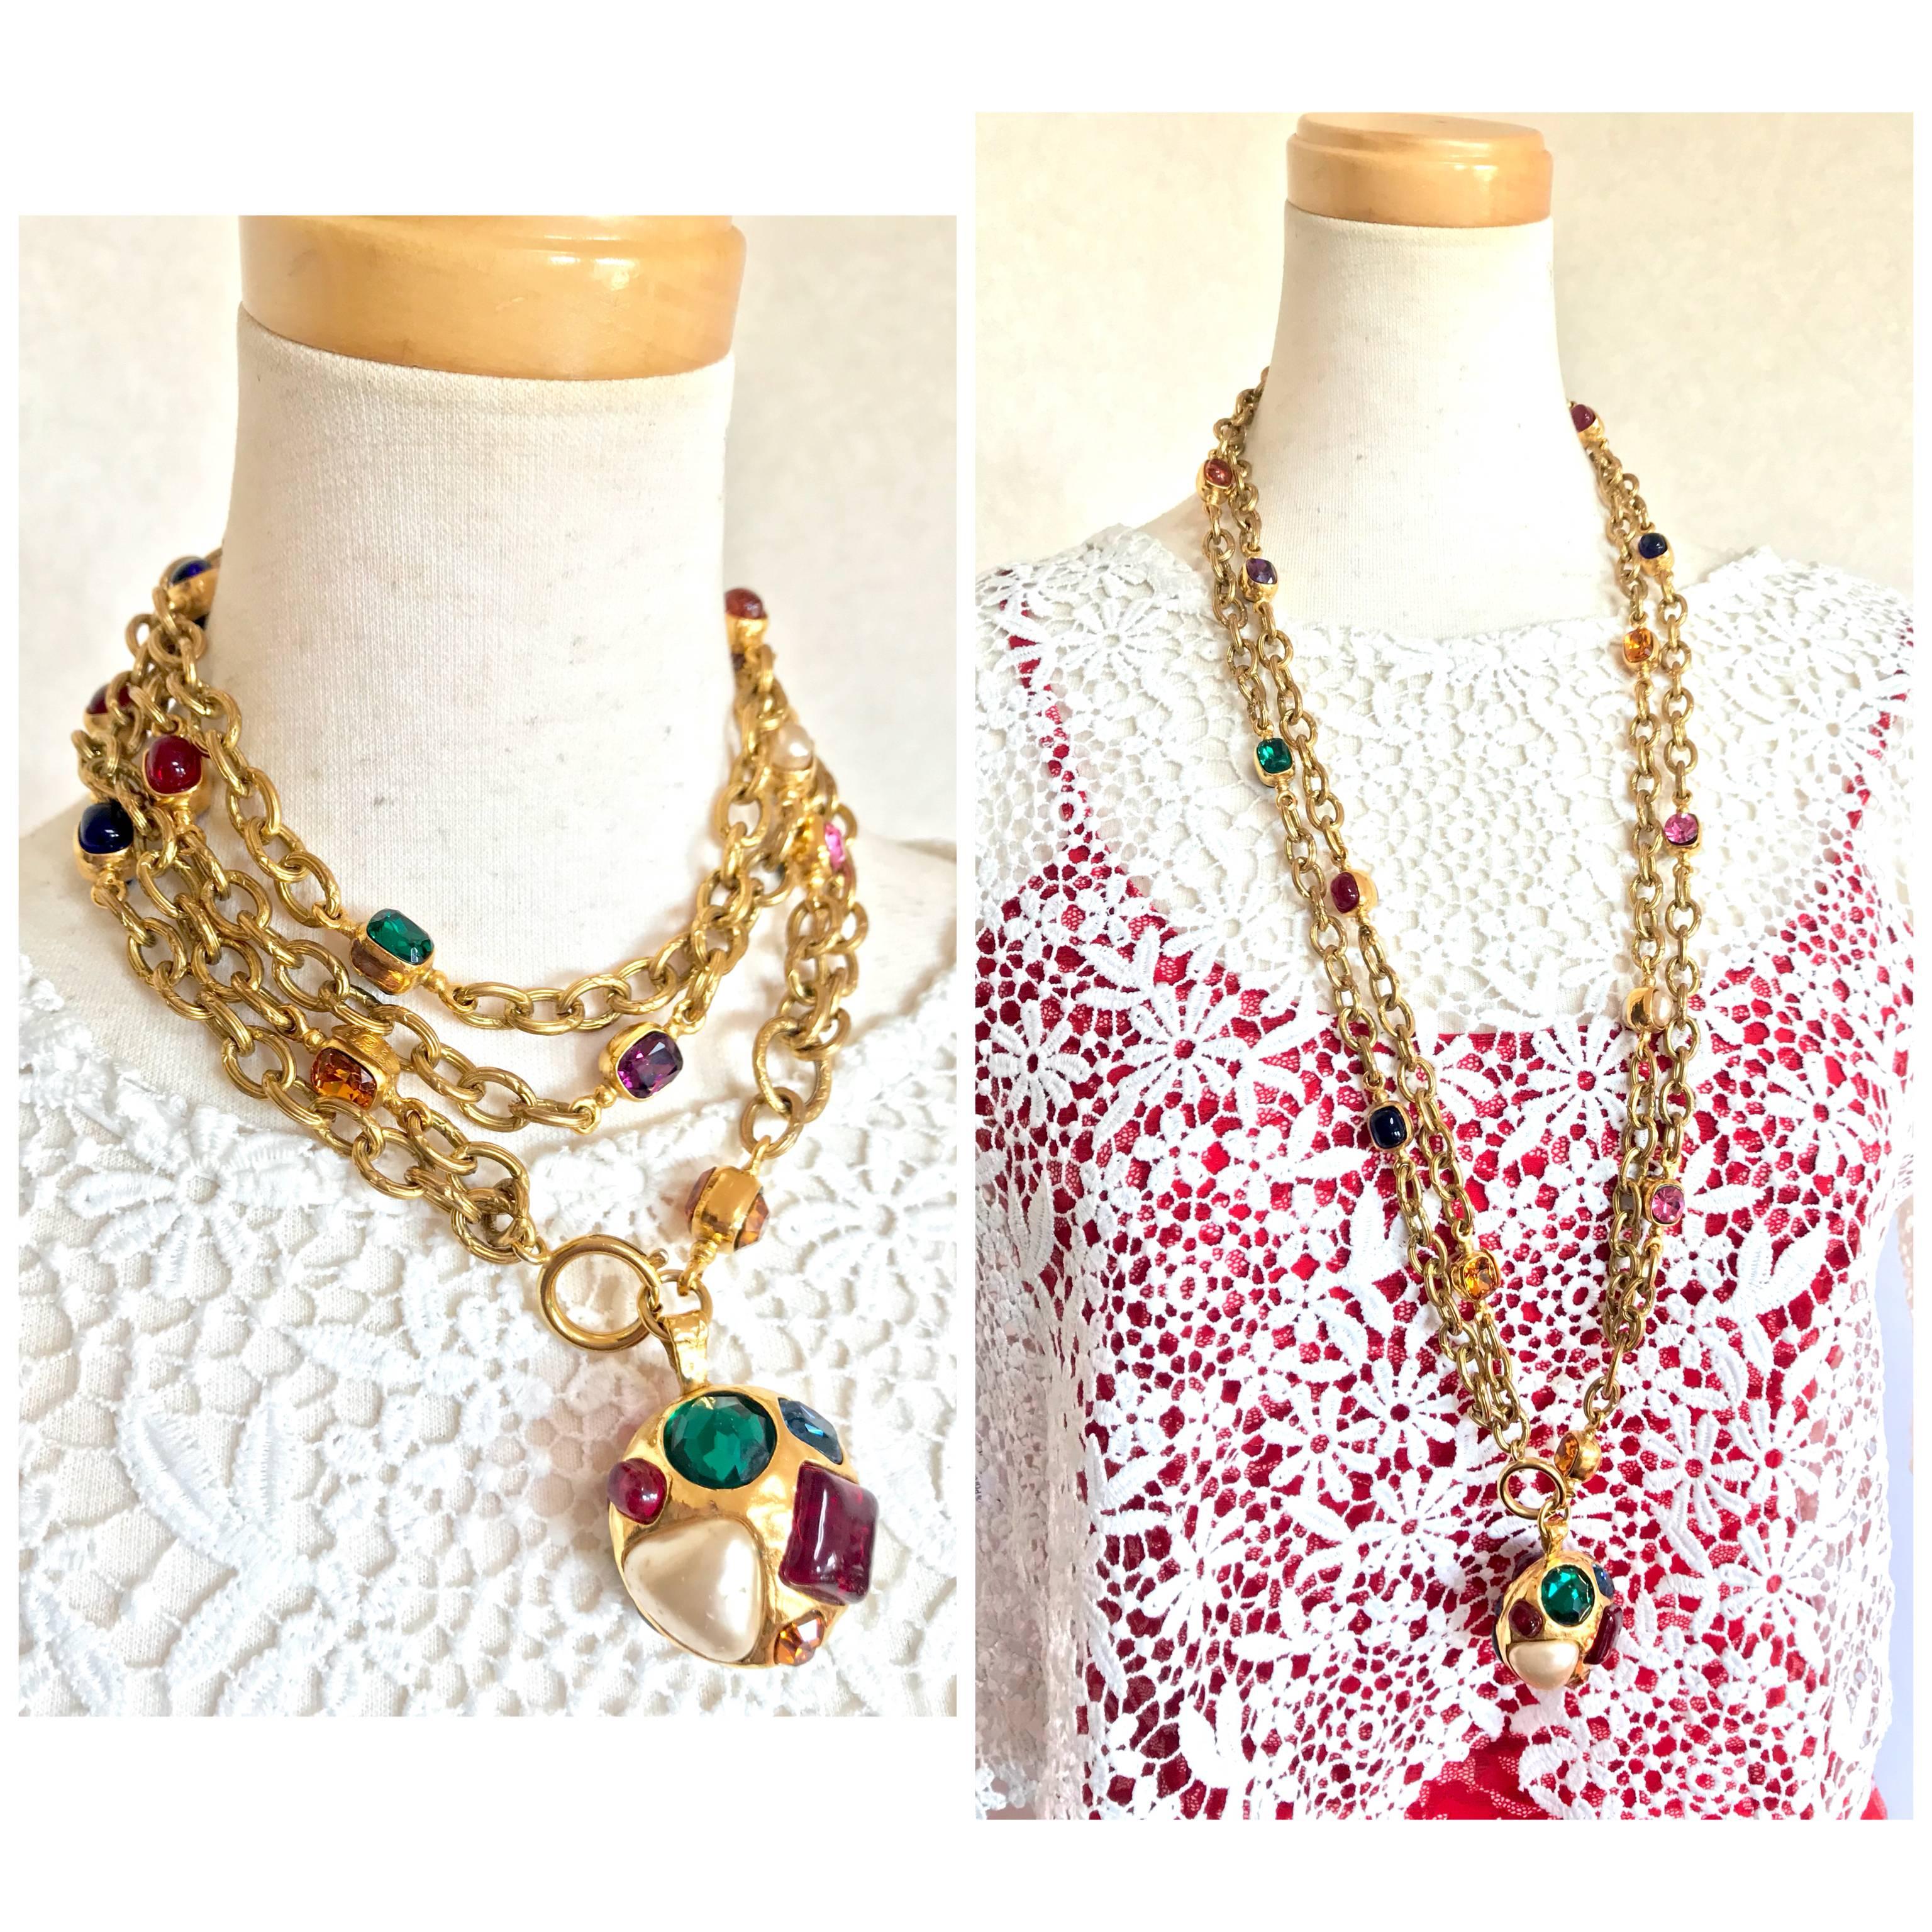 1980s-1990s. Vintage Chanel colorful gripoix stones and faux pearls double chain long necklace with large ornamental pendant top. 
Perfect gift.

Introducing one-of-a-kind vintage jewelry piece from Chanel back in the 80’s to early 90’s.
Double